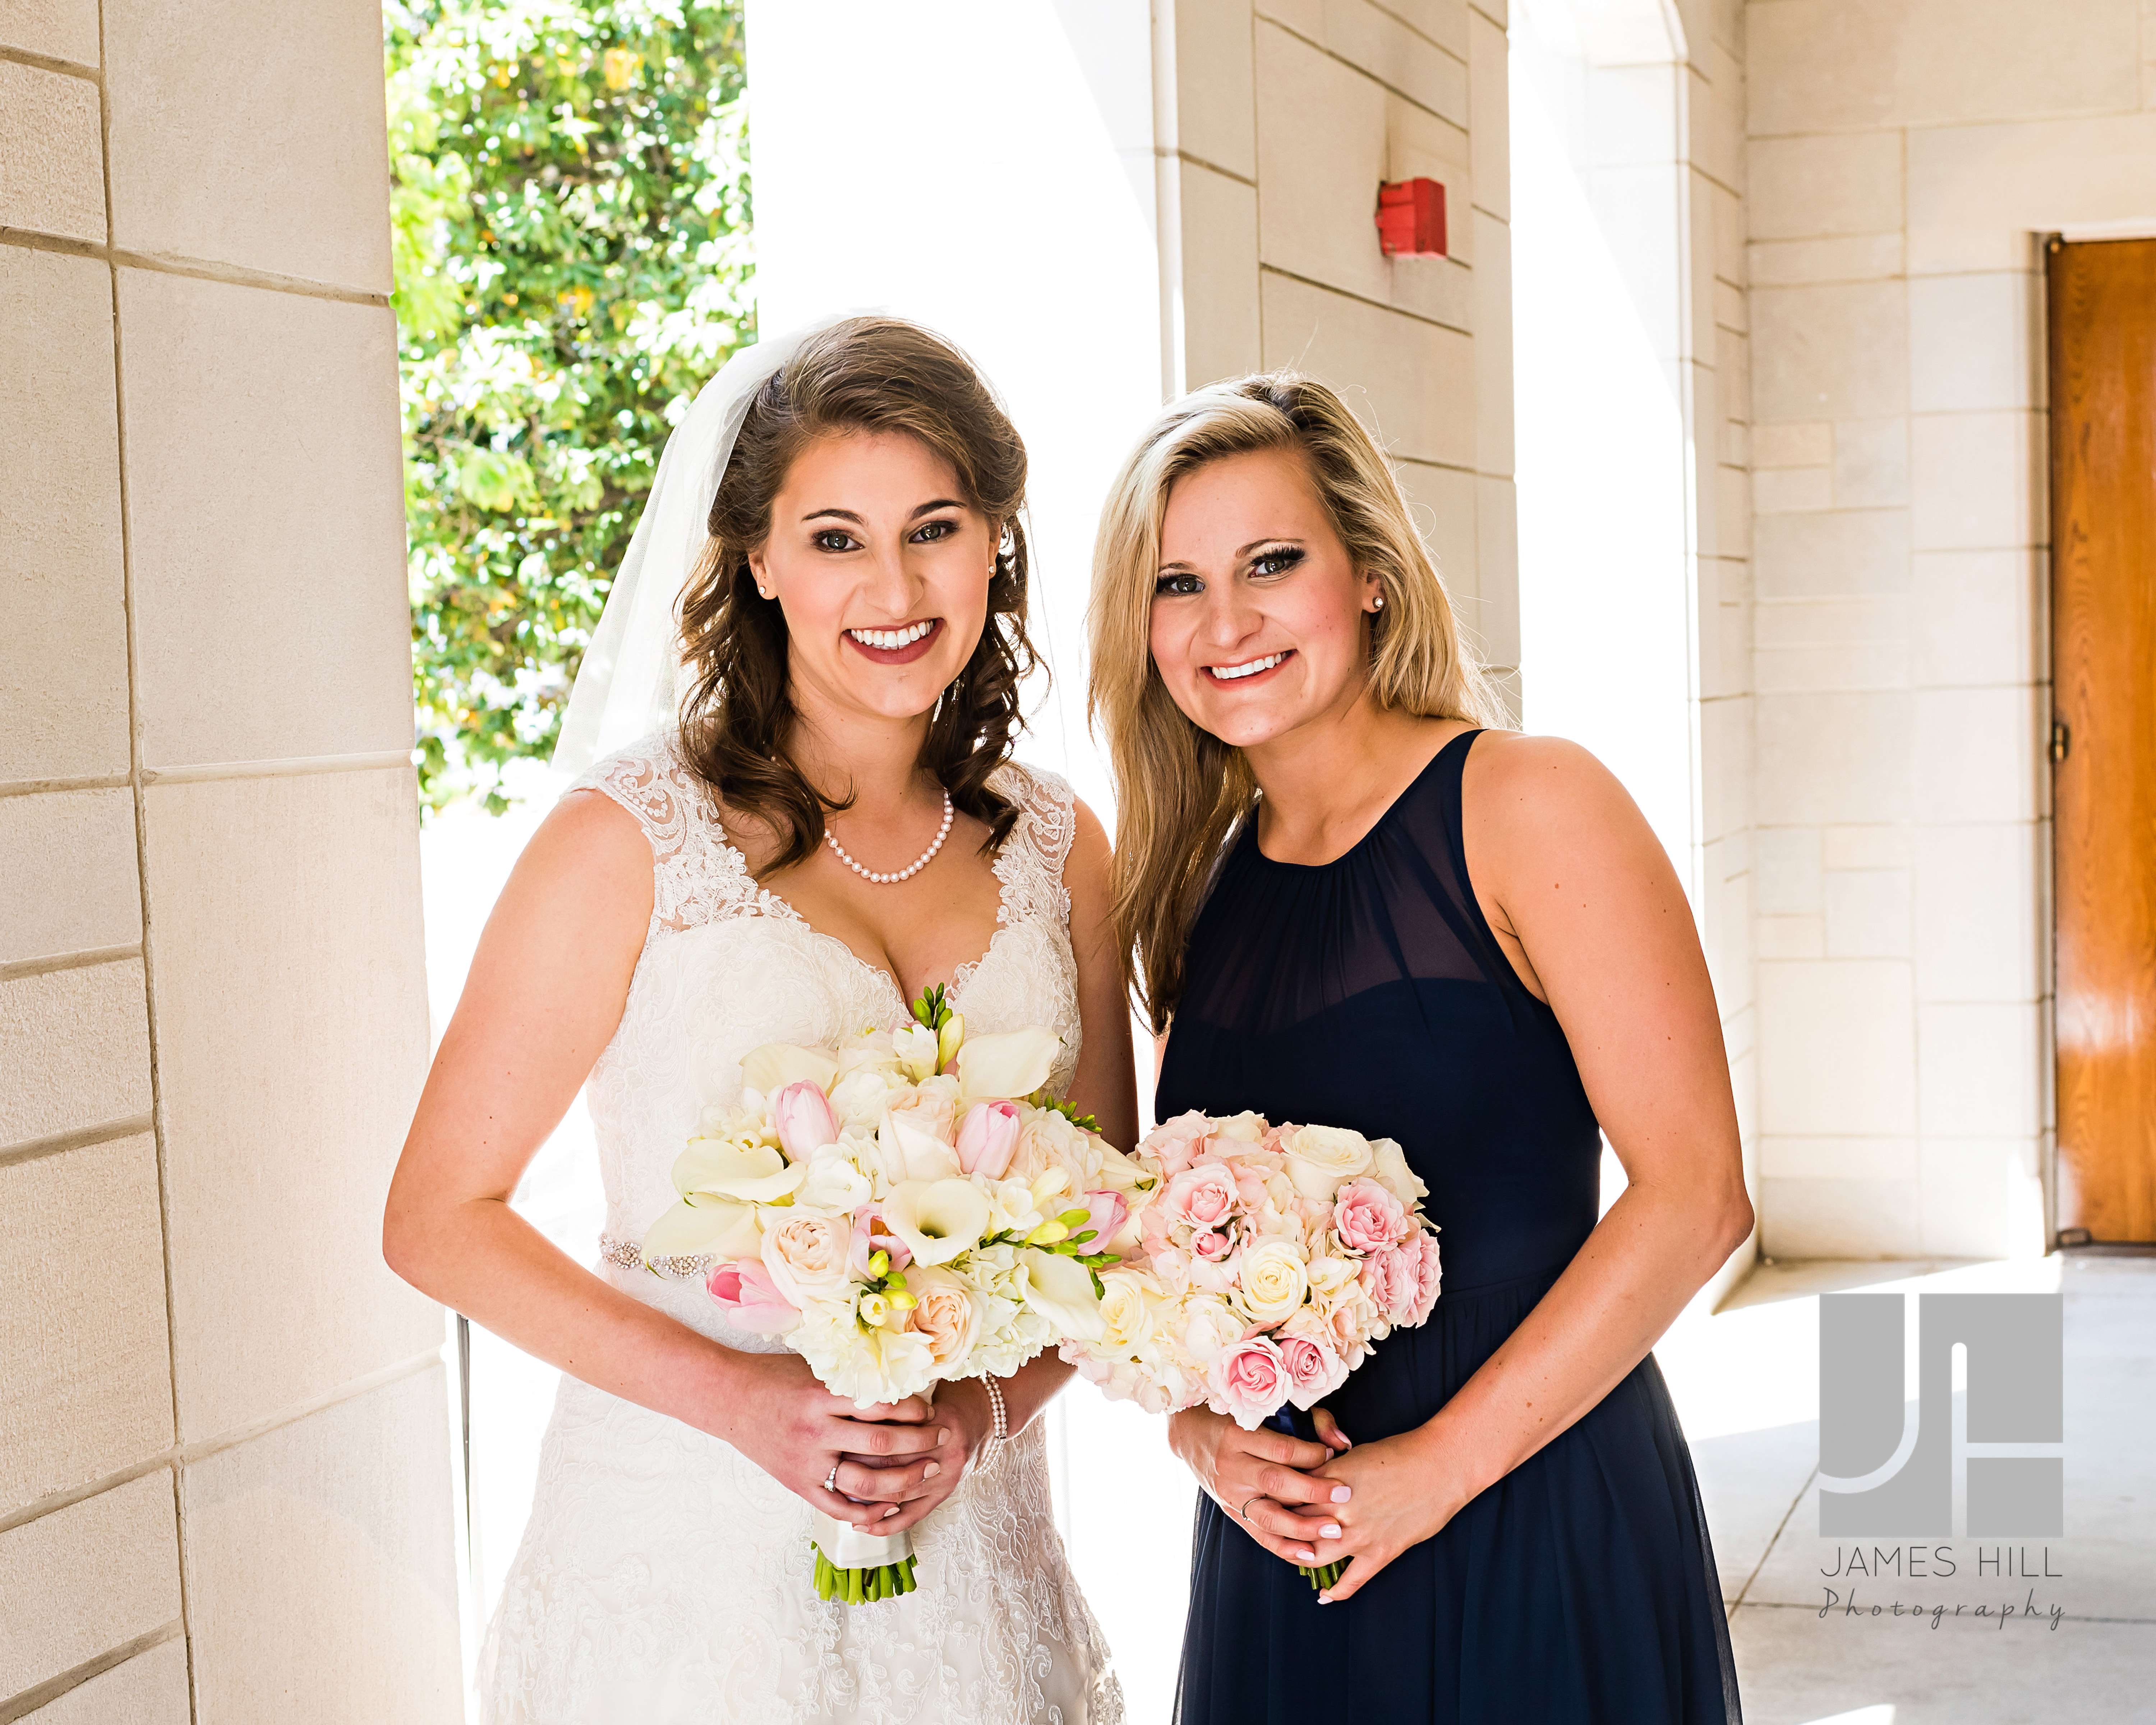 Brittany & Brooke moments before walking down the aisle. Gorgeous girls!